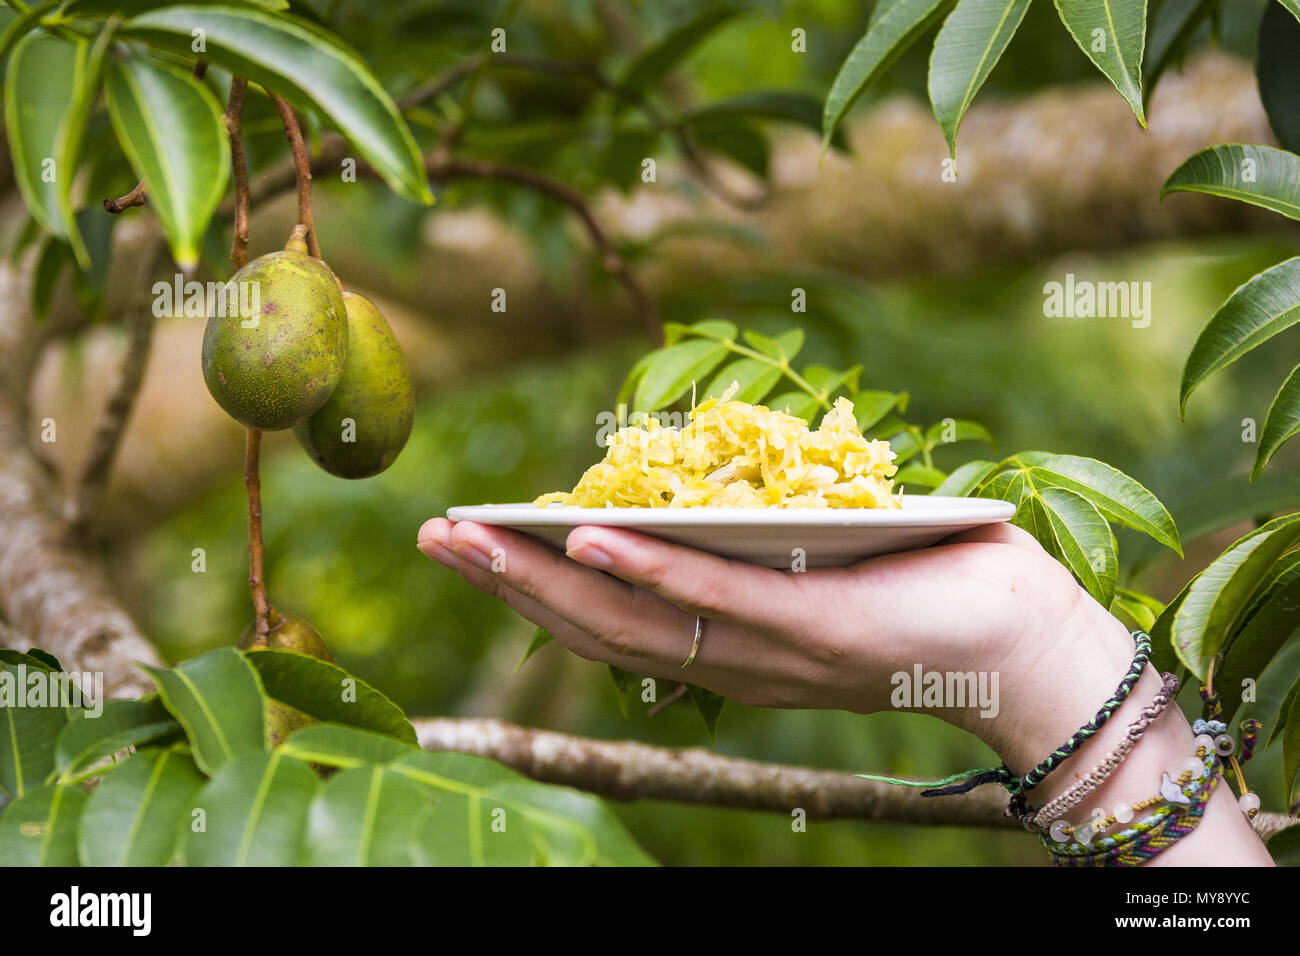 Golden Plum (Spondias dulcis). Hand holding plate with fruit in front of tree with fruit. Seychelles Stock Photo